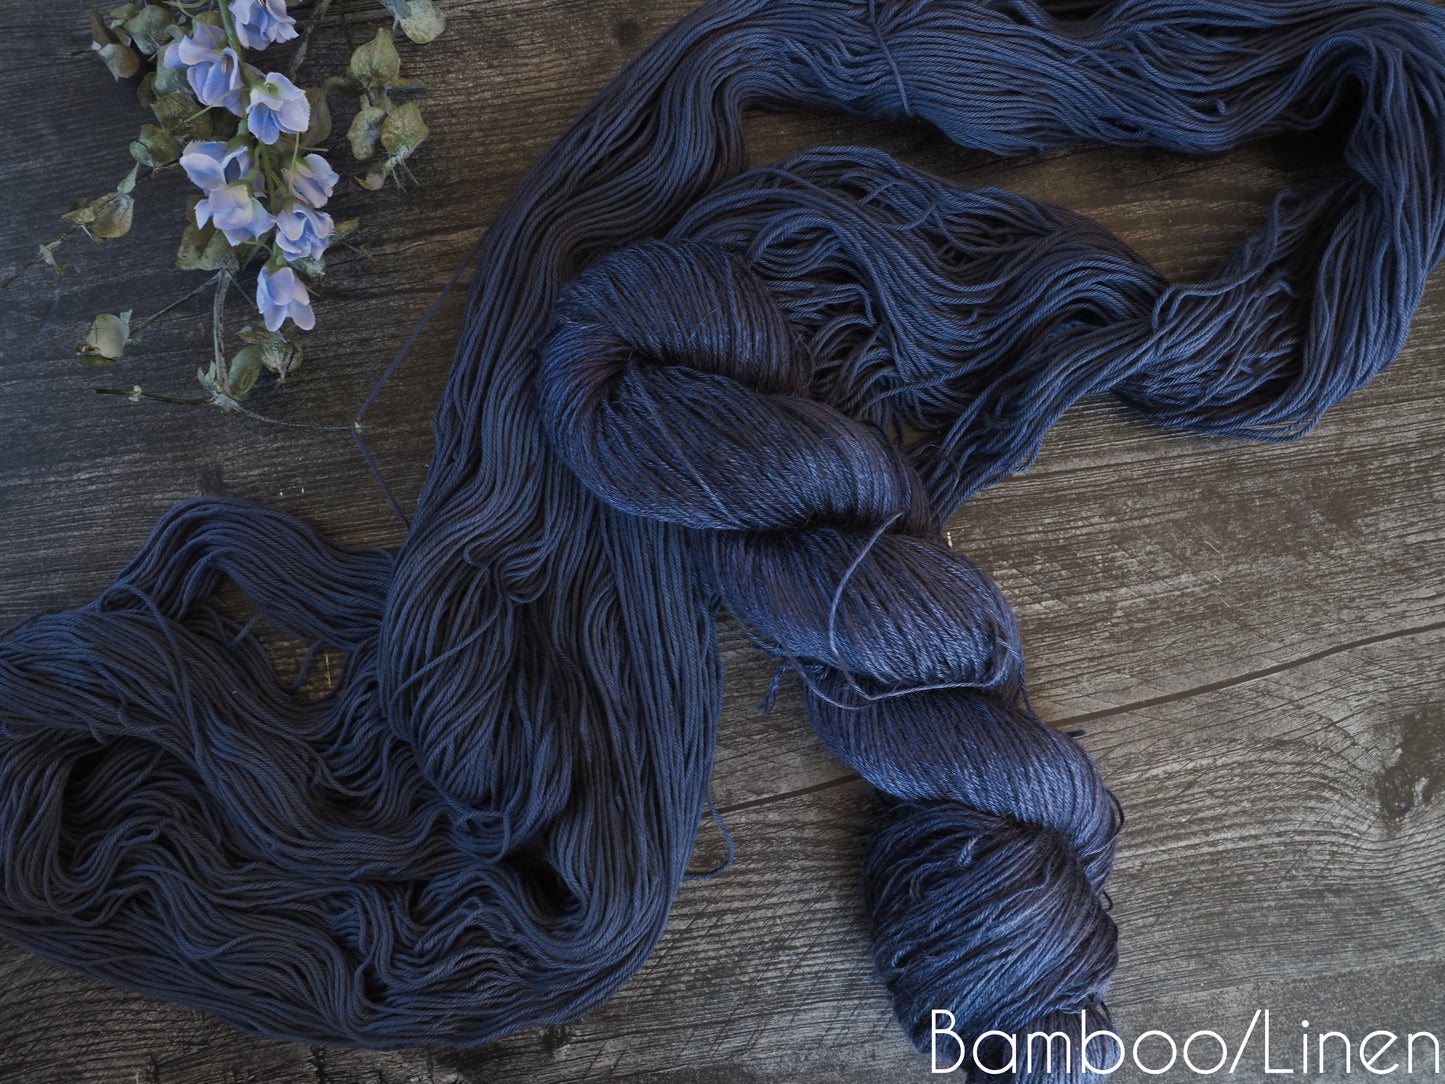 Belladonna - Dyed to Order - *Please Allow 2-3 Weeks for Dyeing*